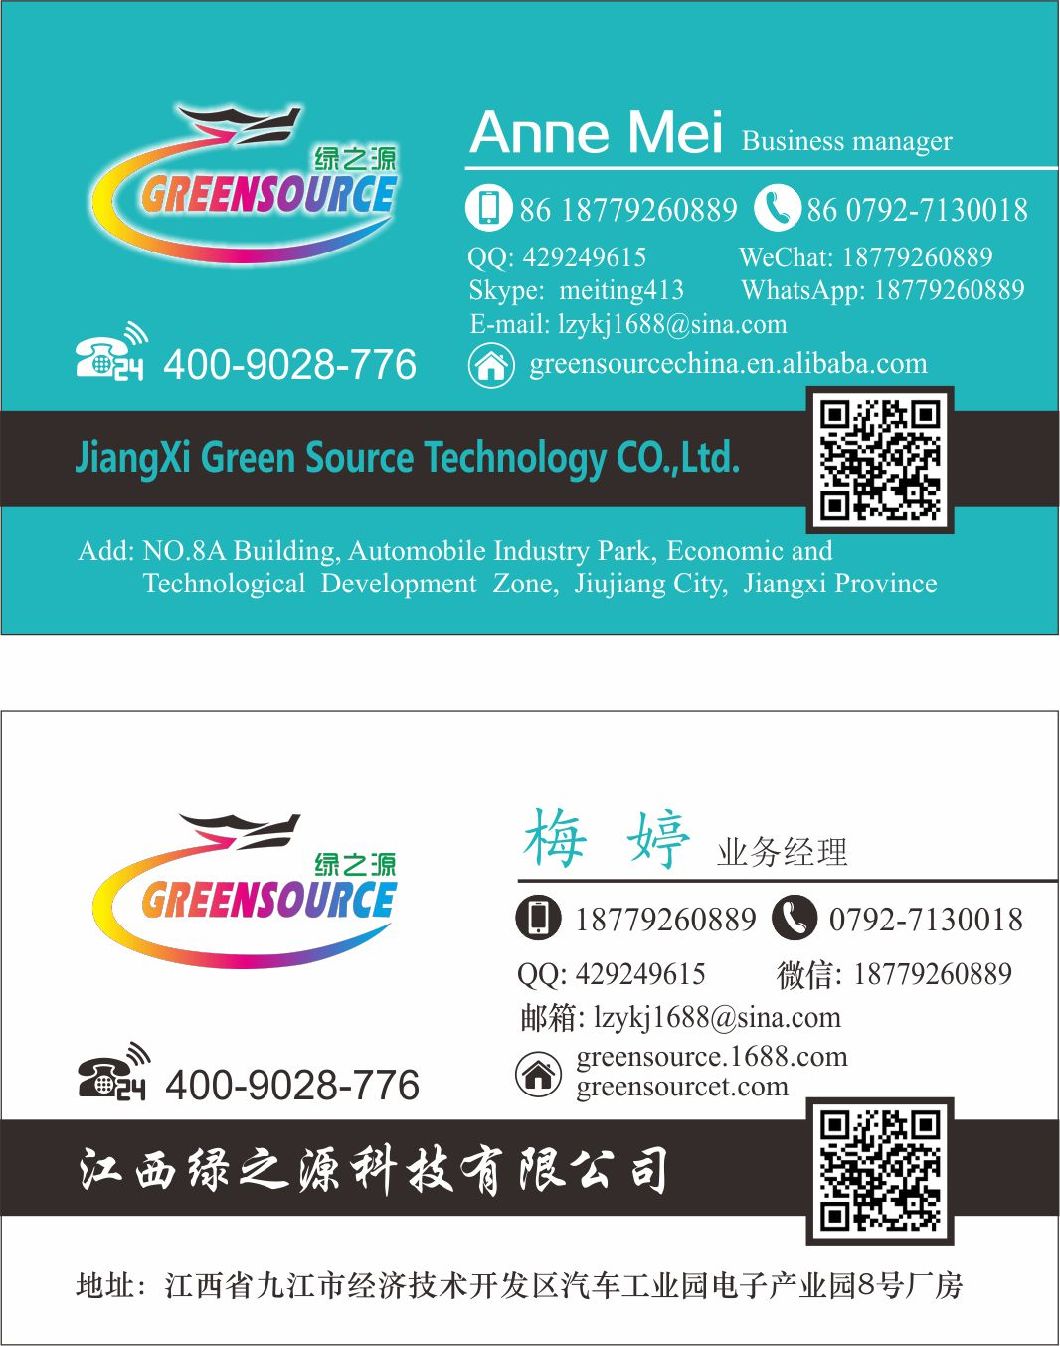 Greensource, Low Price in-Mould Labeling